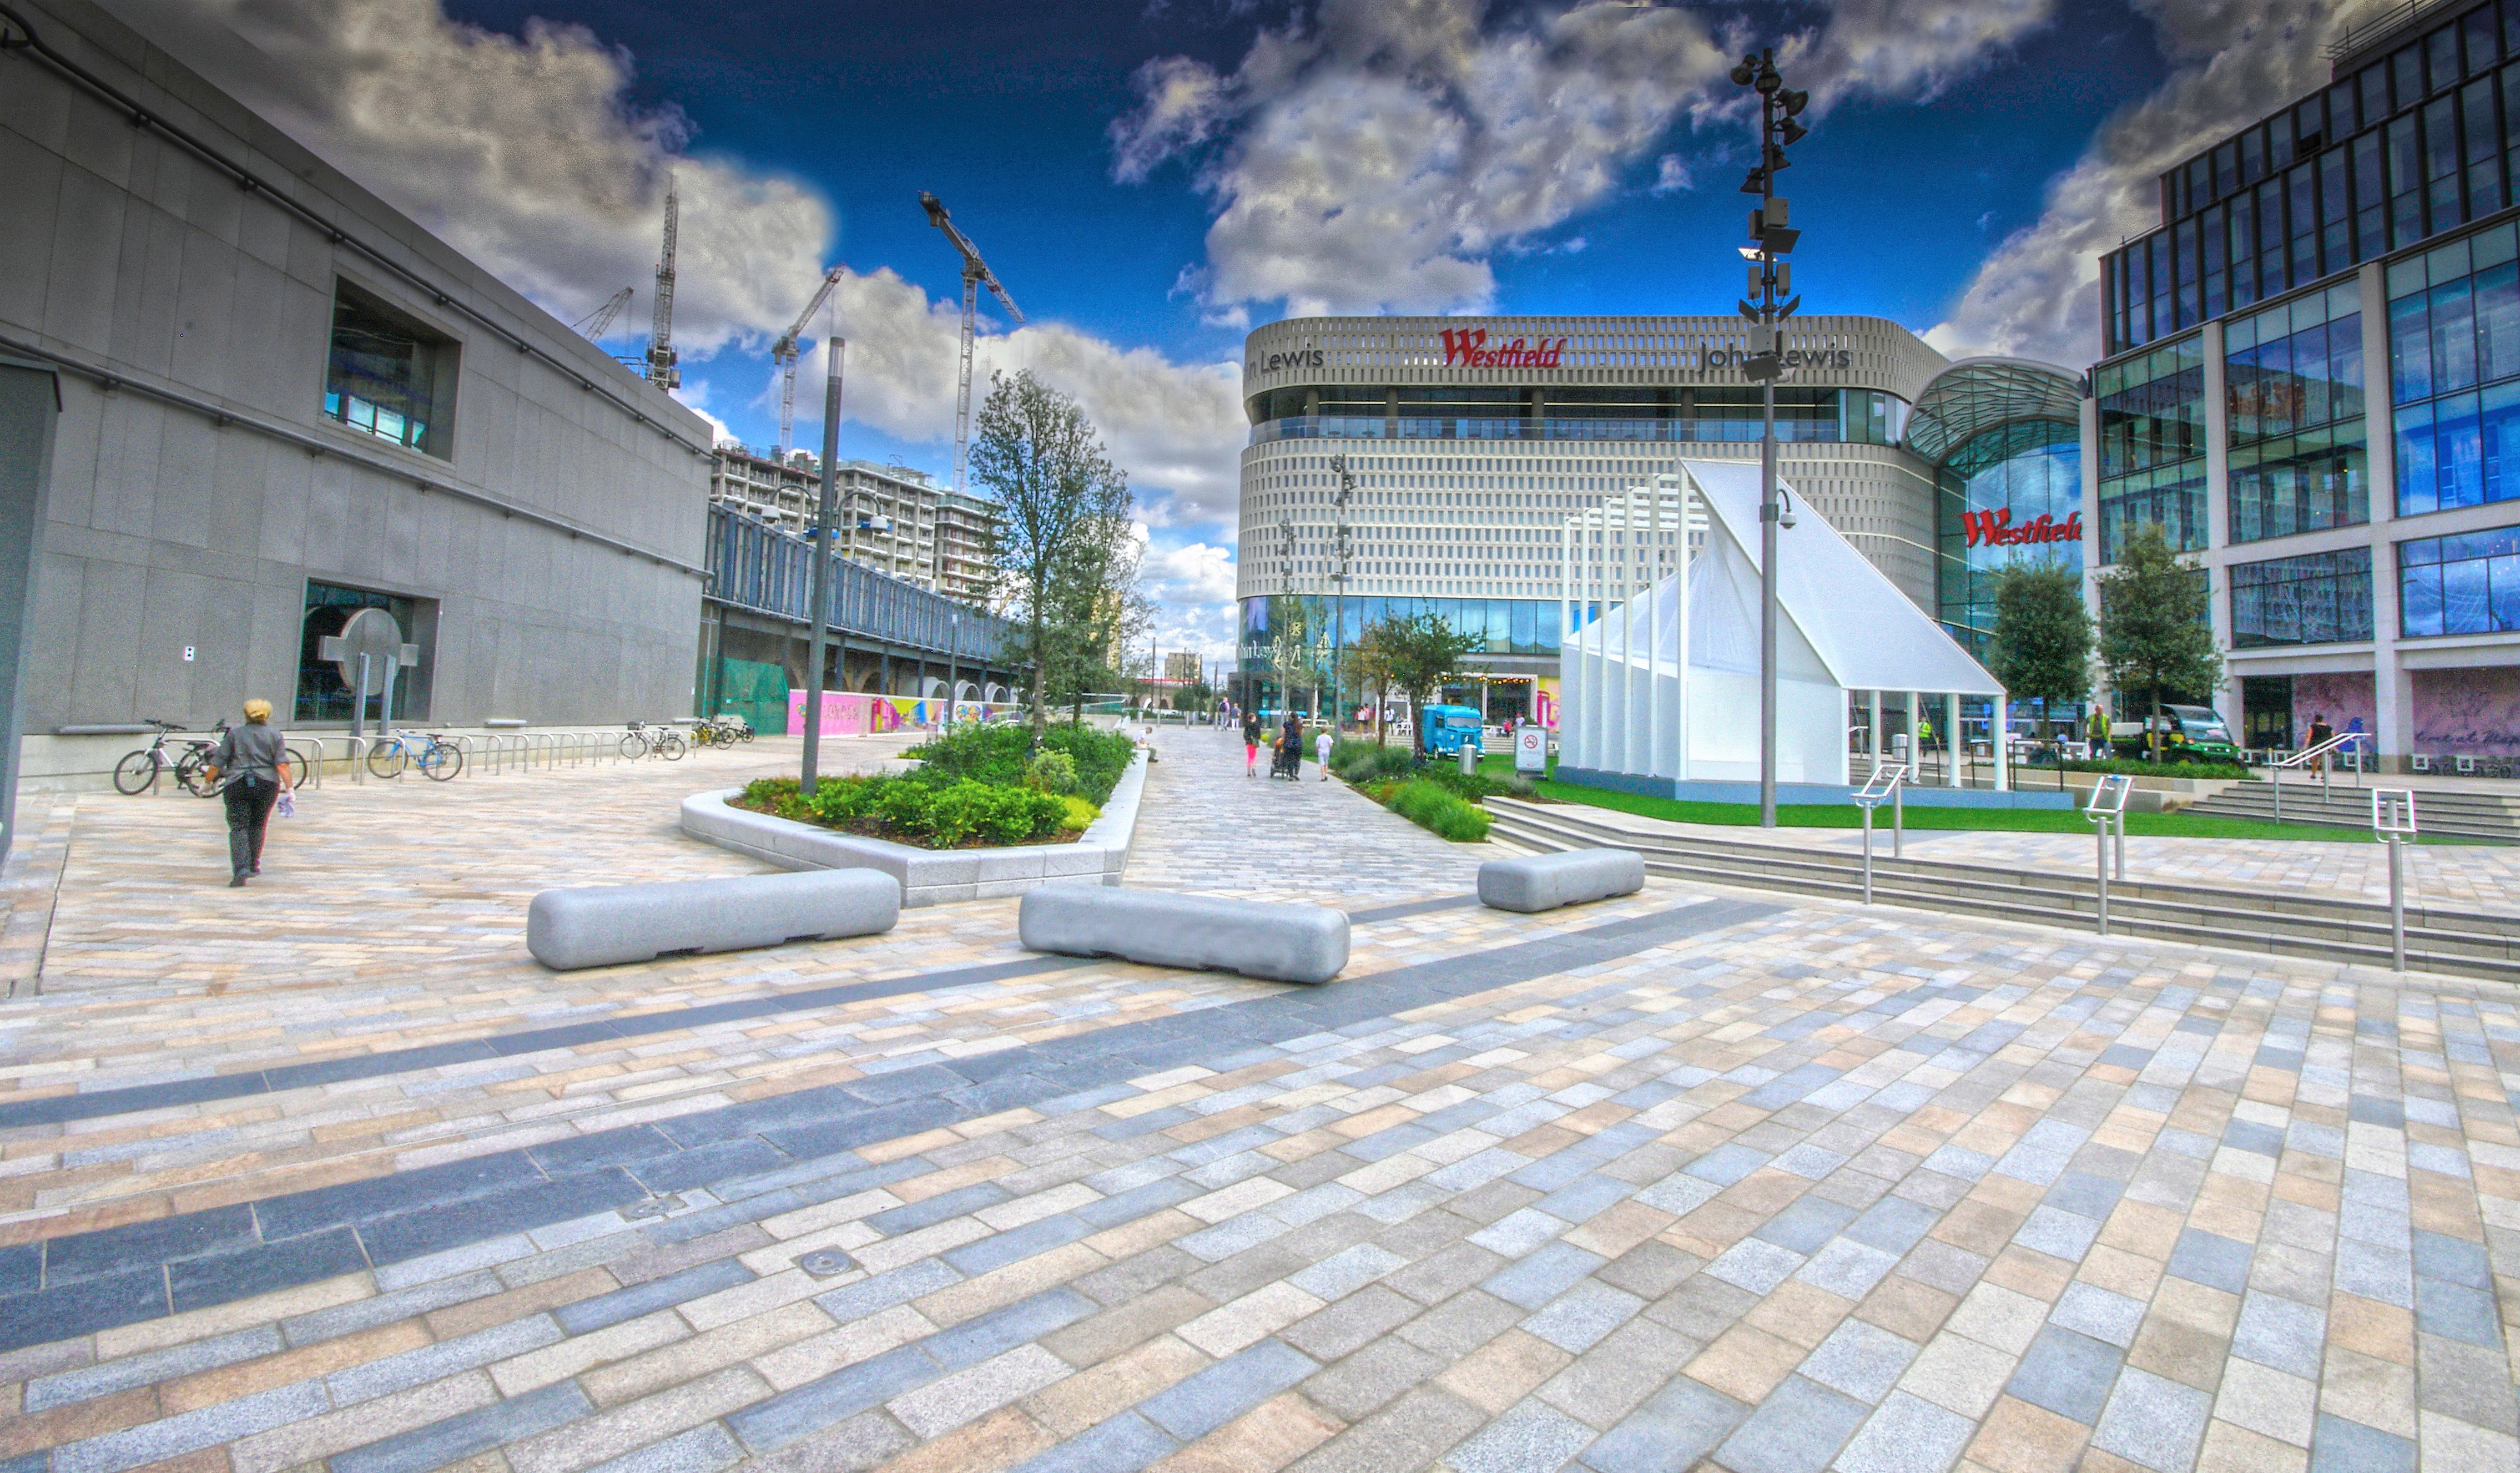 Westfield London expansion: Location, design and facilities